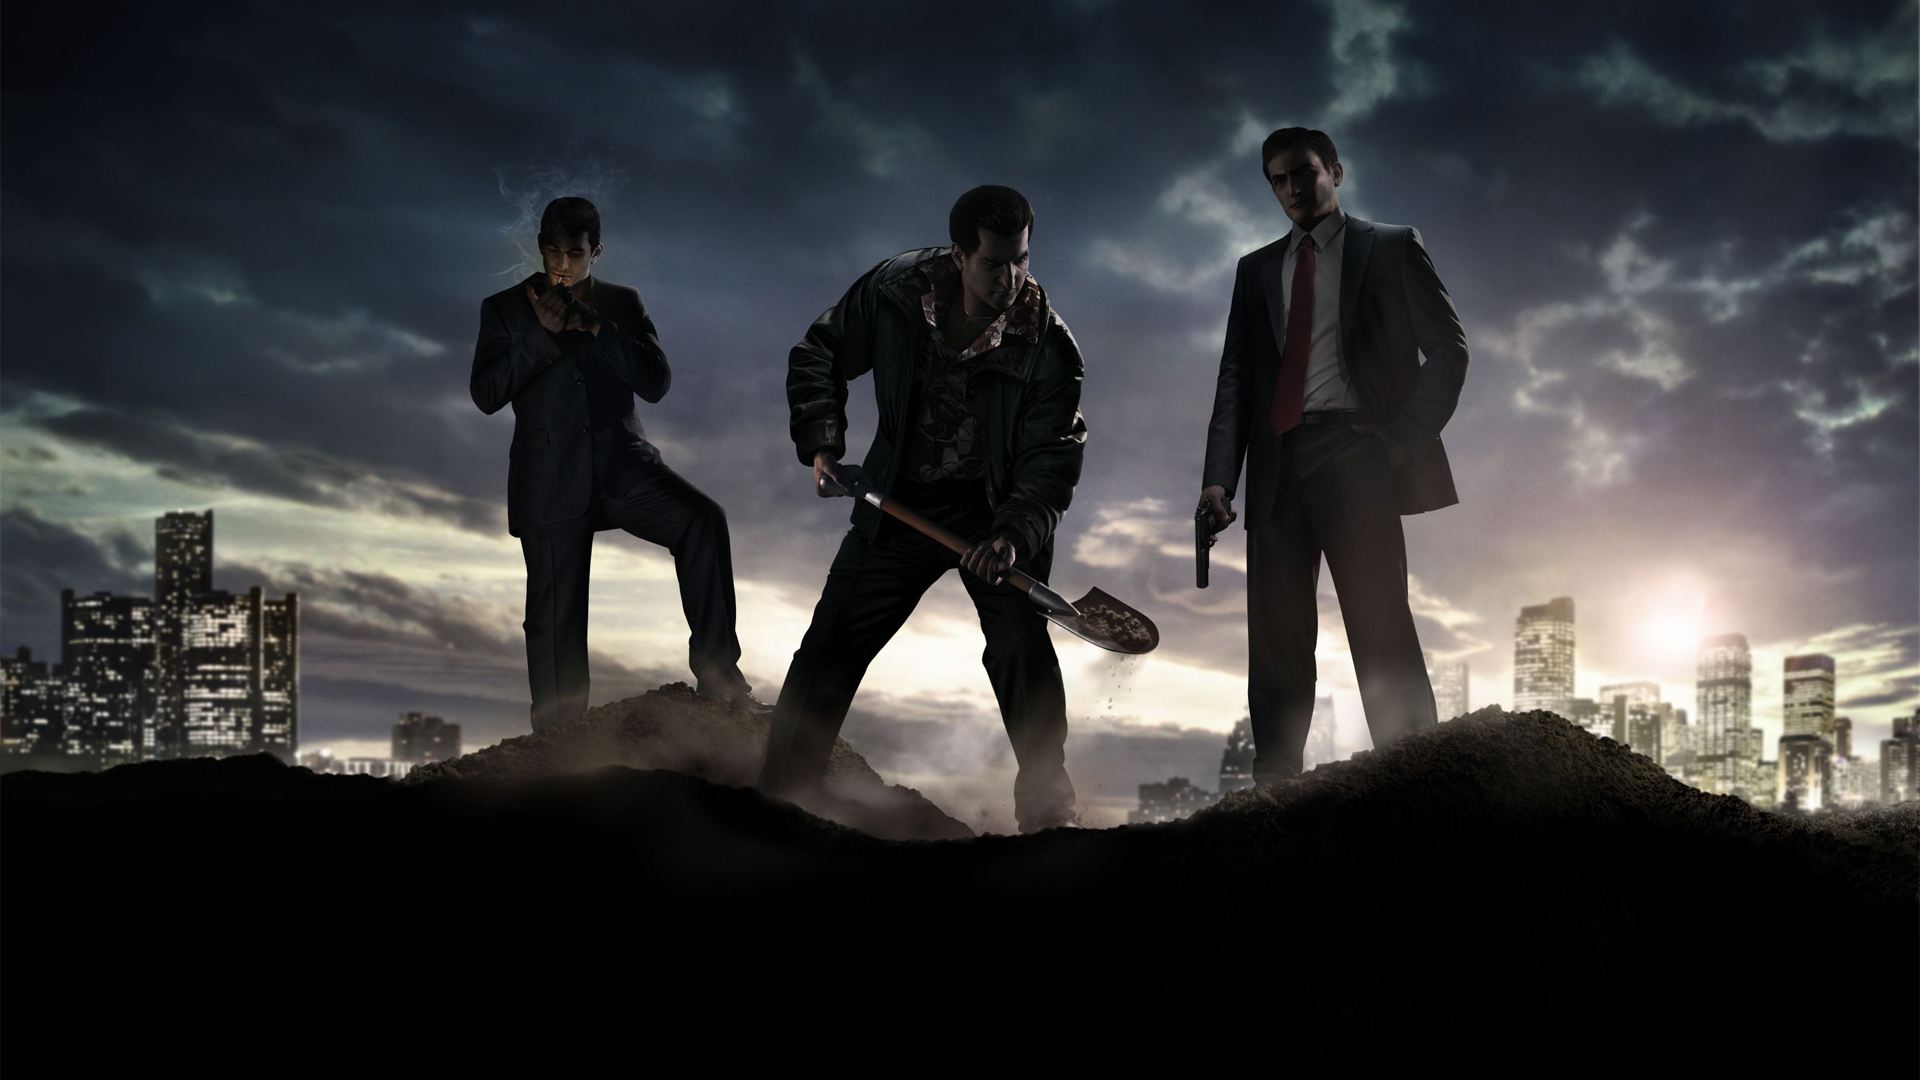 Mafia Wallpaper Live Gangster APK 1.02 for Android – Download Mafia  Wallpaper Live Gangster APK Latest Version from APKFab.com